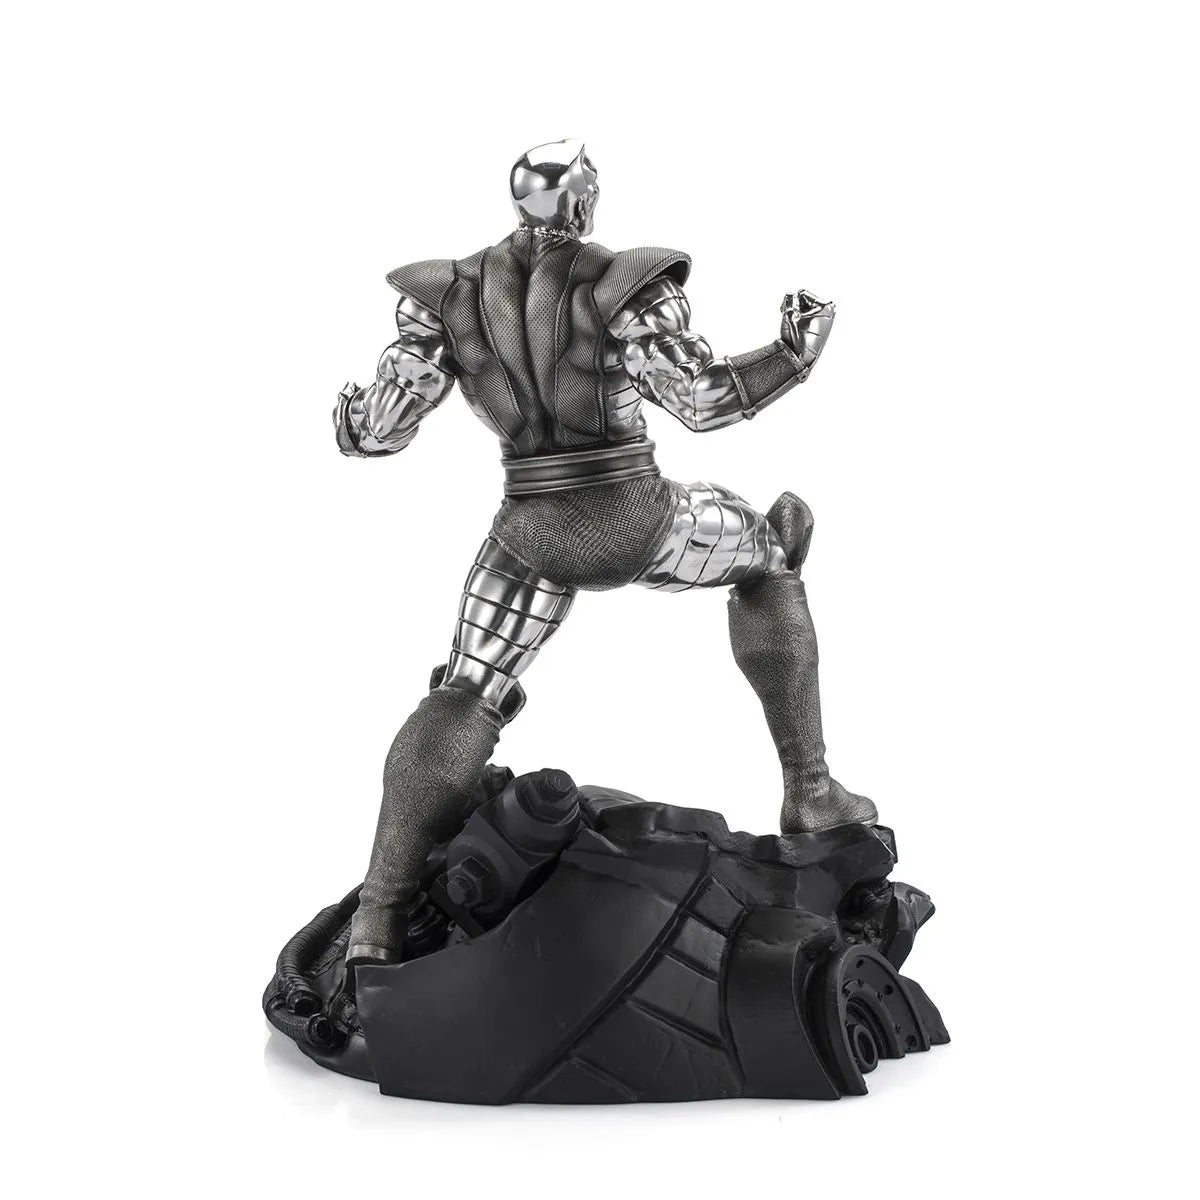 Colossus Victorious Limited Edition Metal Figurine by Royal Selangor -Royal Selangor - India - www.superherotoystore.com